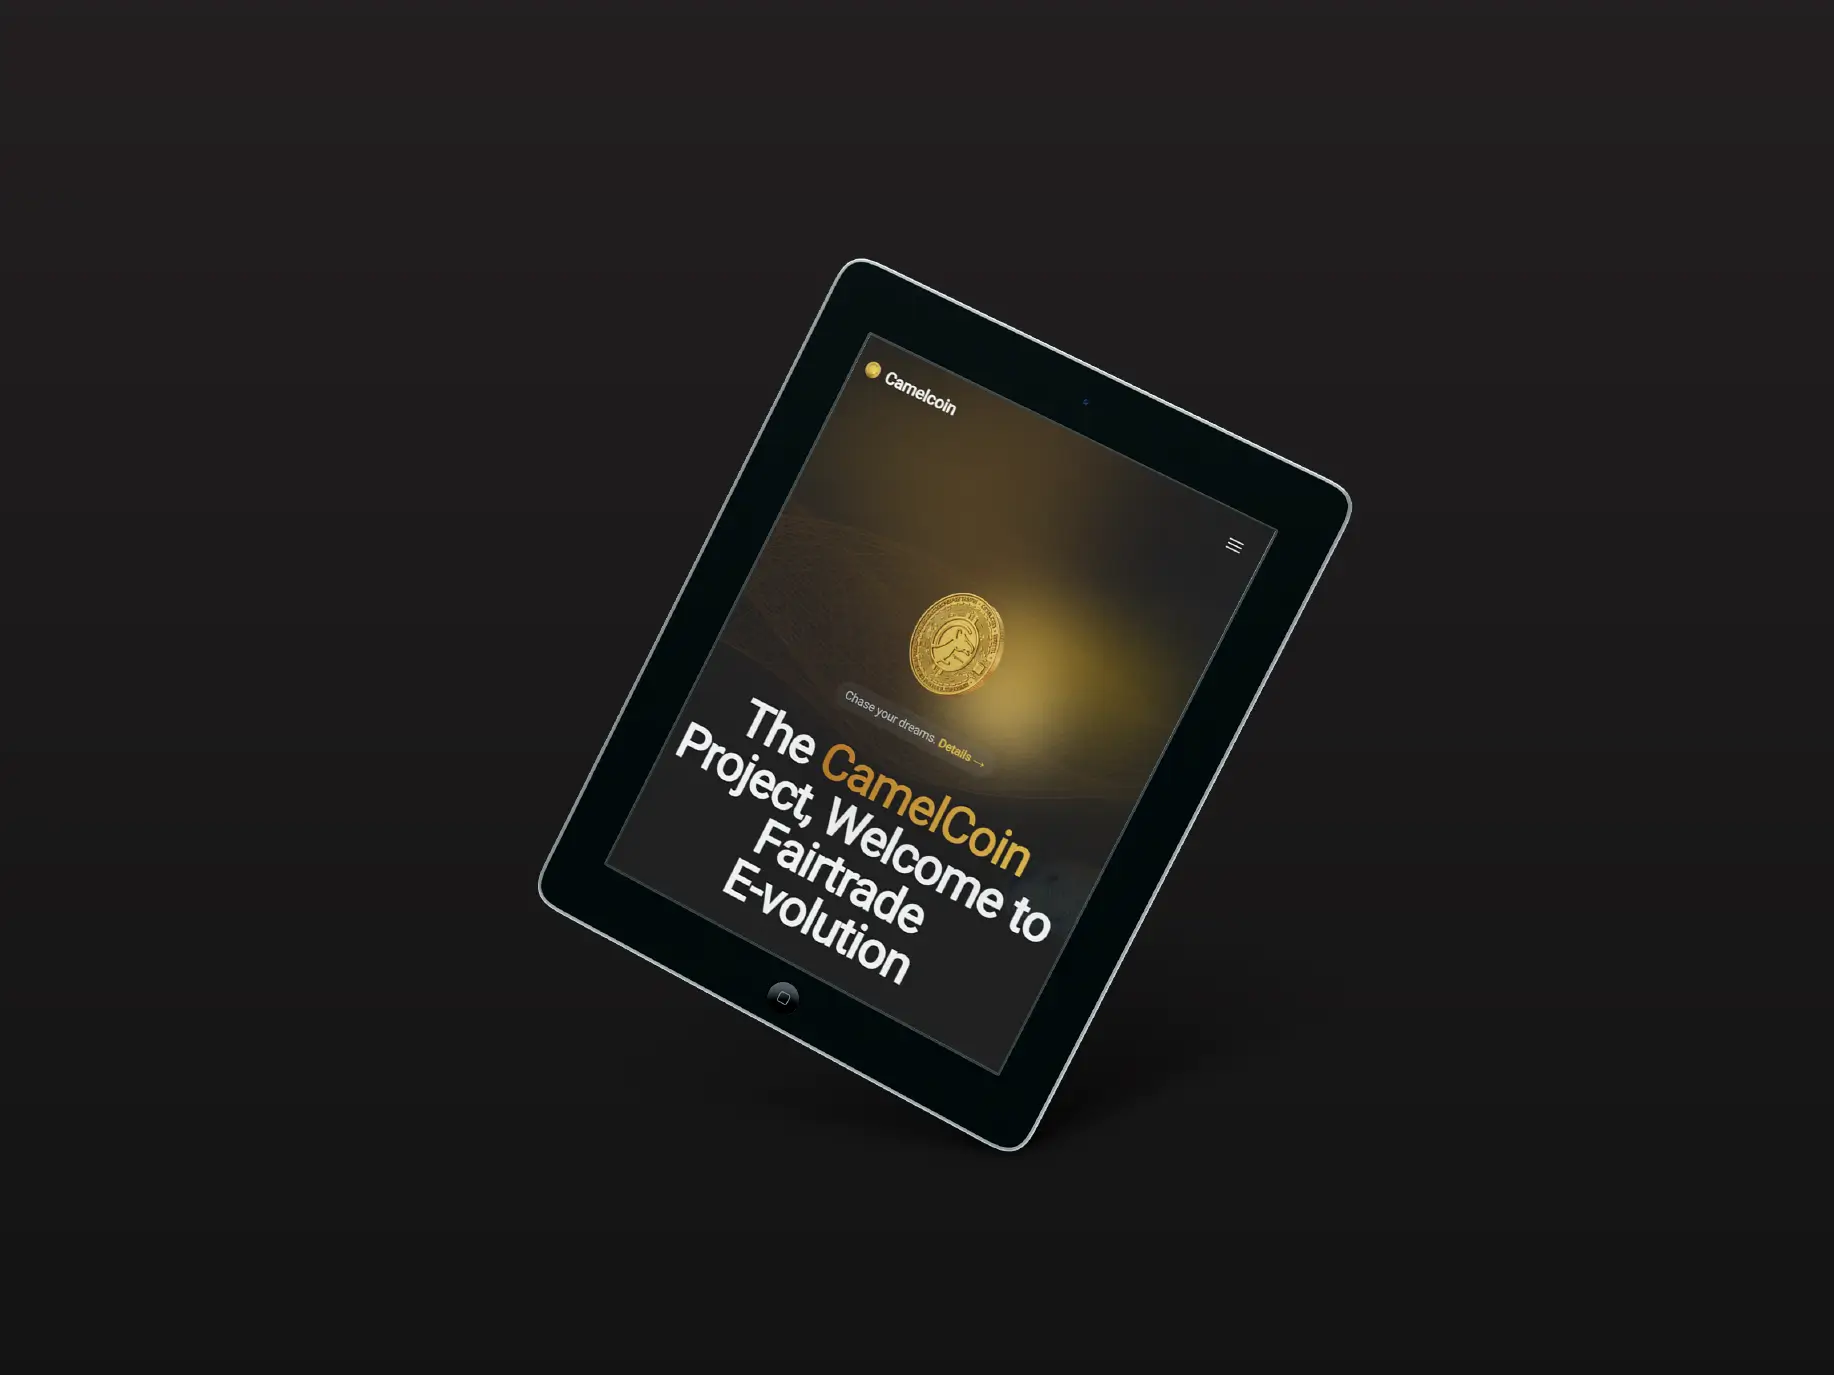 ipad screen show for the website of camelcoin groundbreaking cryptocurrency project